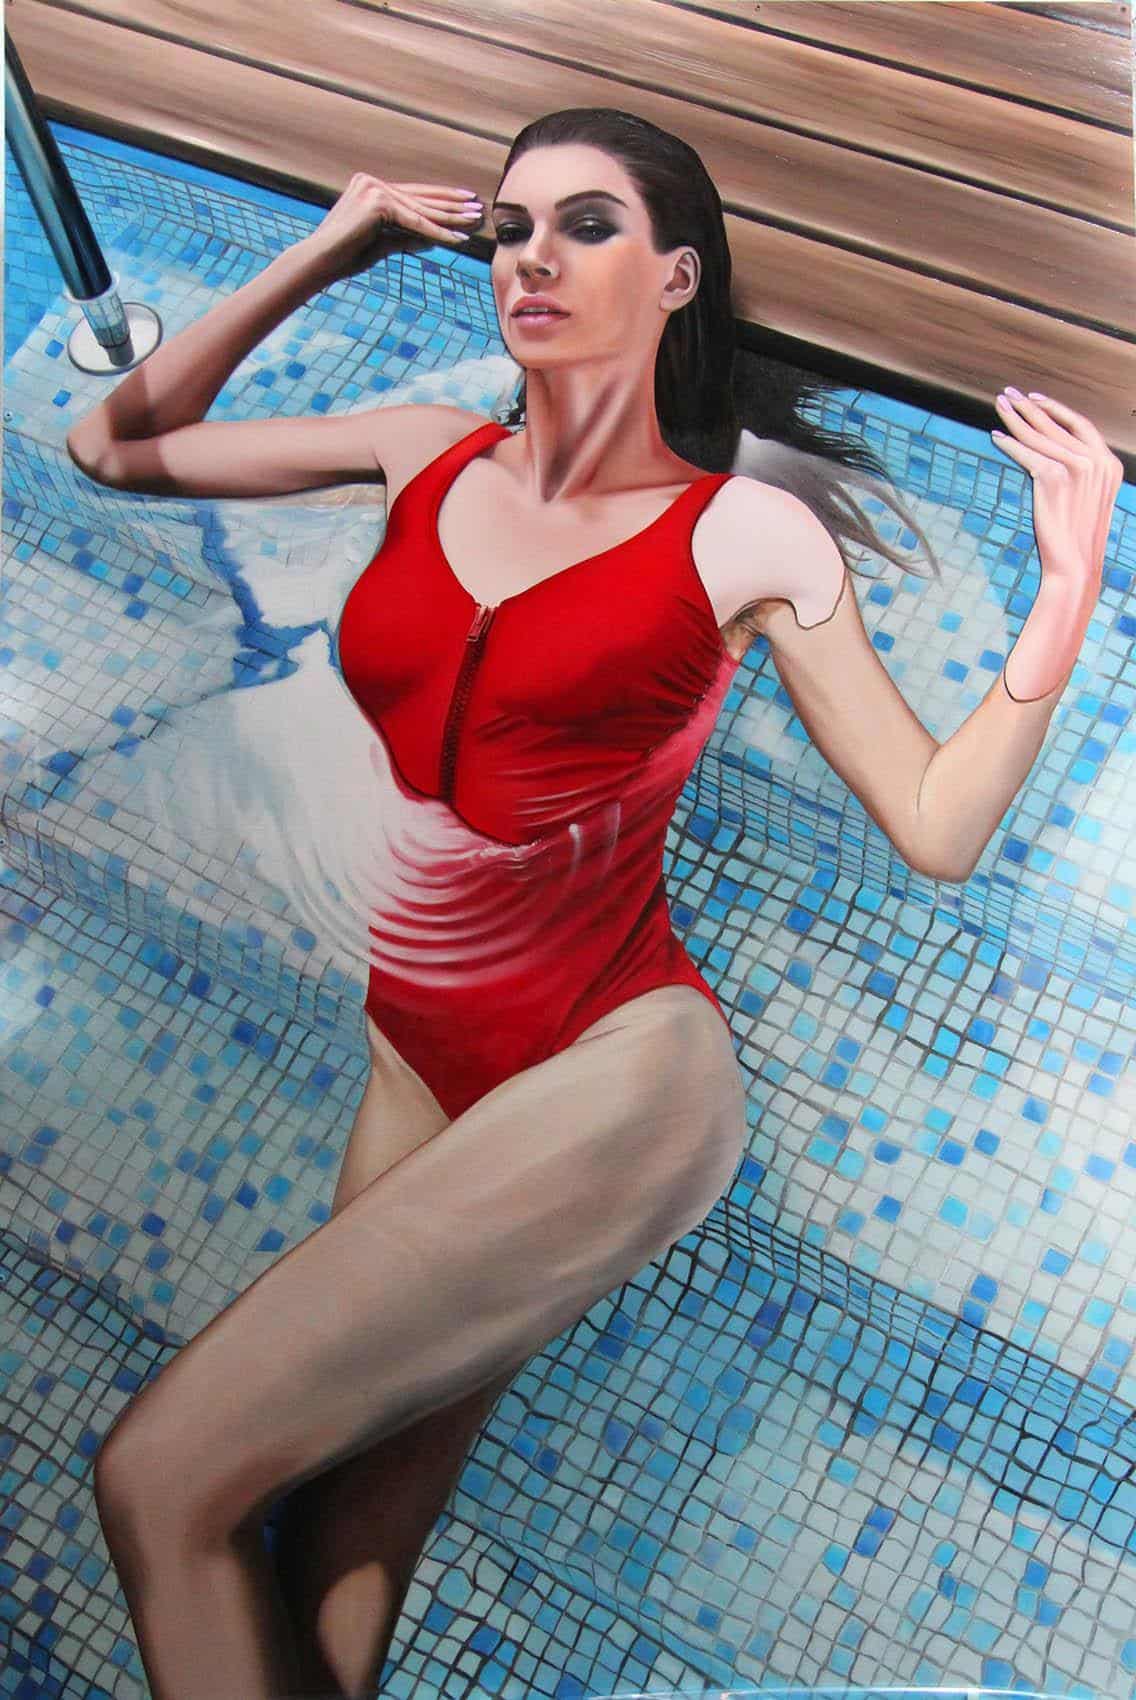 Woman In Pool by Tommaso Arscone